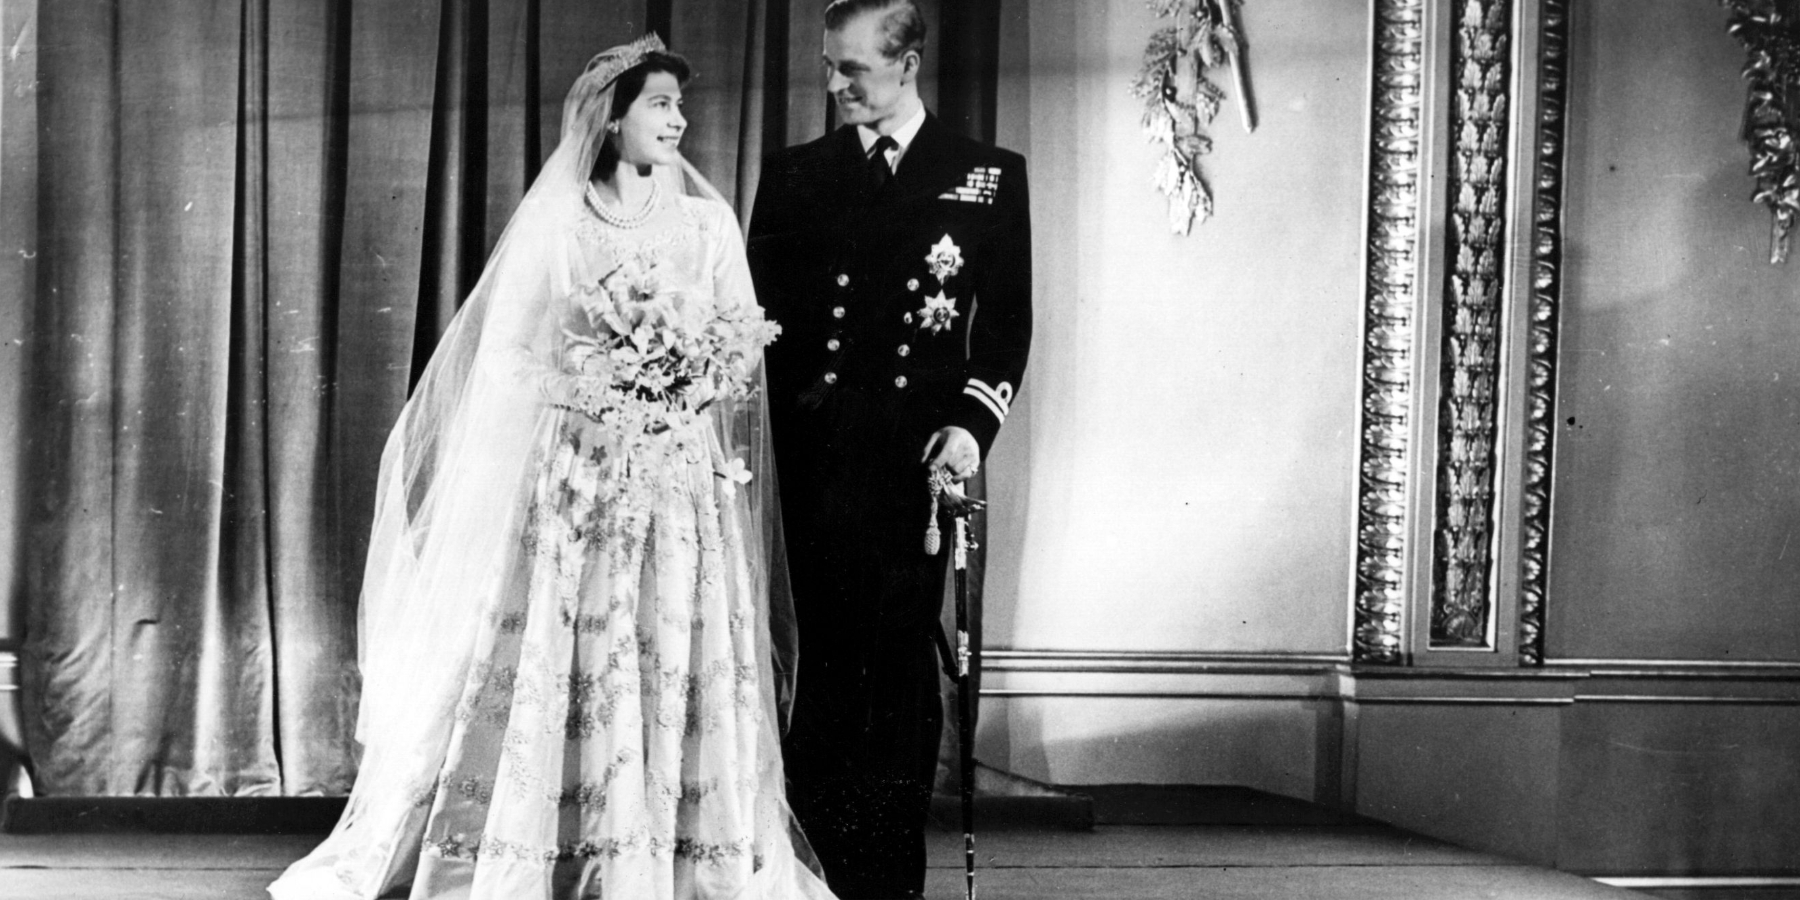 One Item United Queen Elizabeth II and Prince Philip at Her Funeral